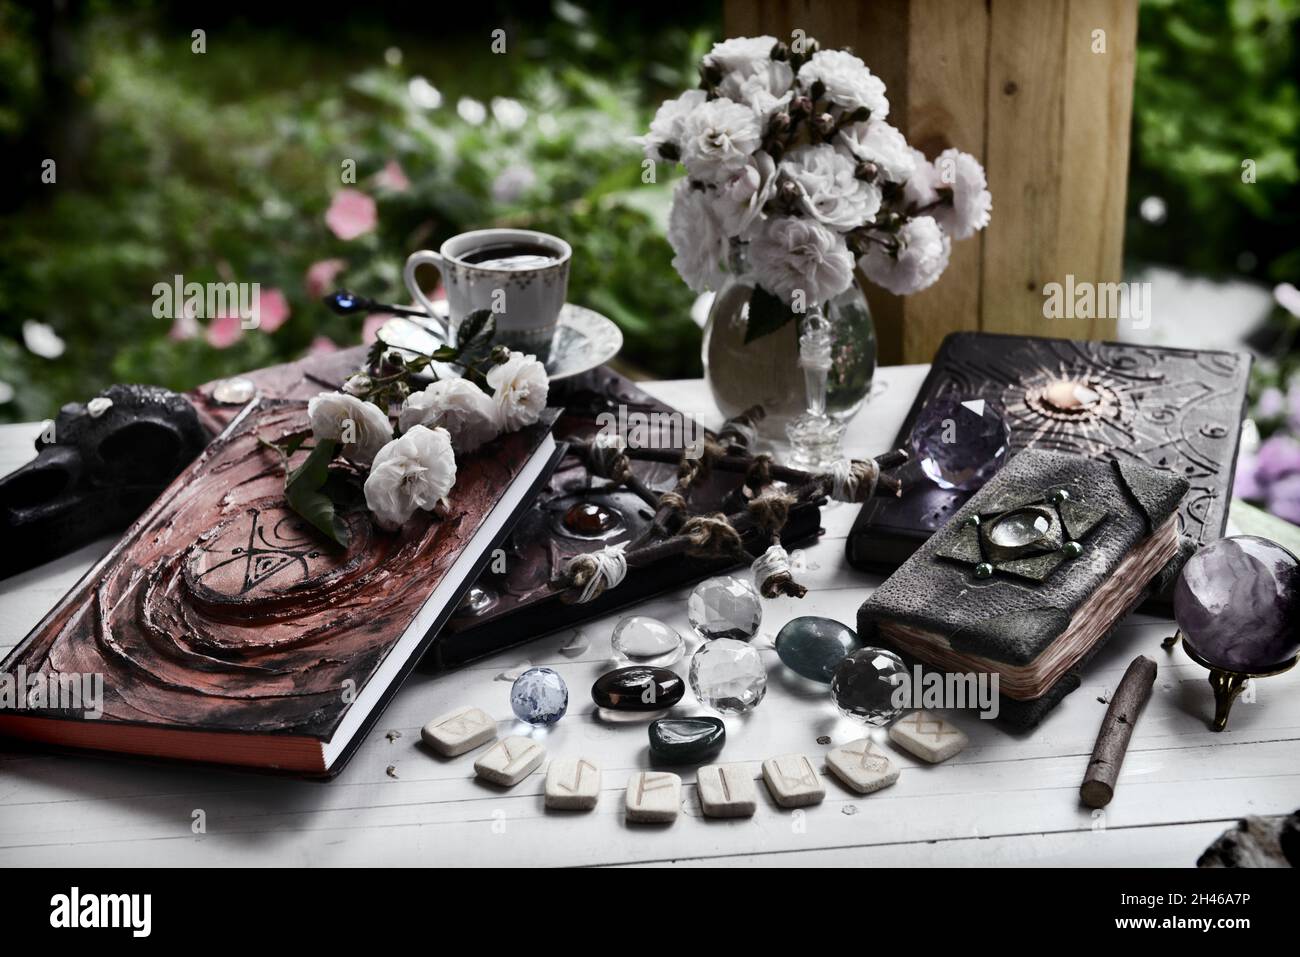 Grunge still life with old book of spells, runes amd witch magic objects on ritual table.  Esoteric, occult and mystic concept for witchcraft Stock Photo